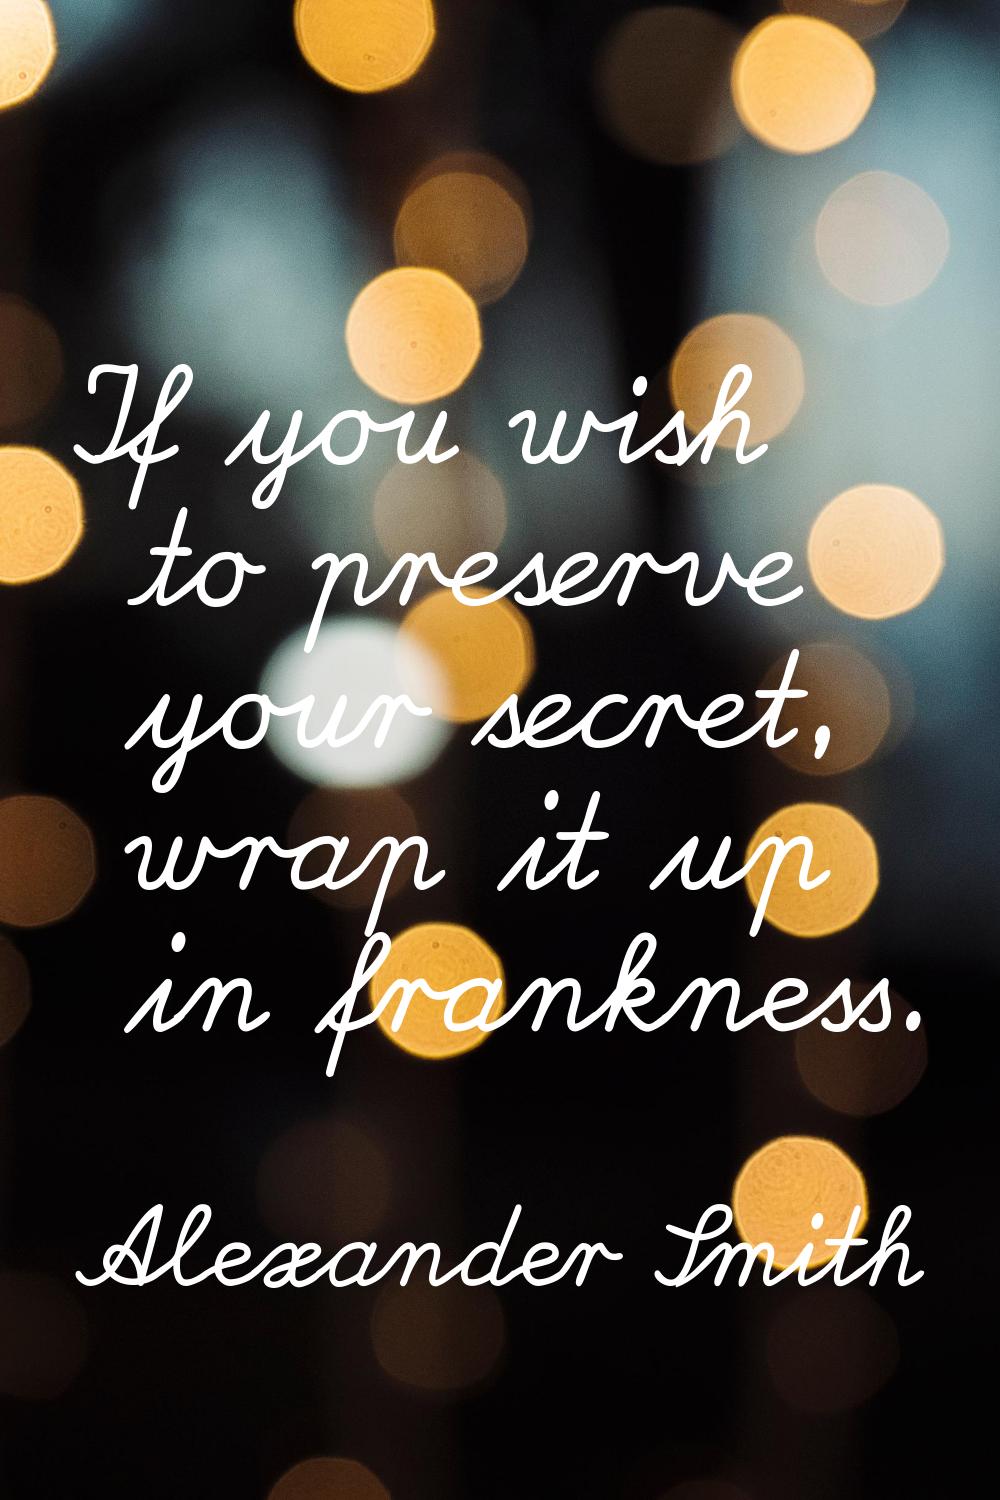 If you wish to preserve your secret, wrap it up in frankness.